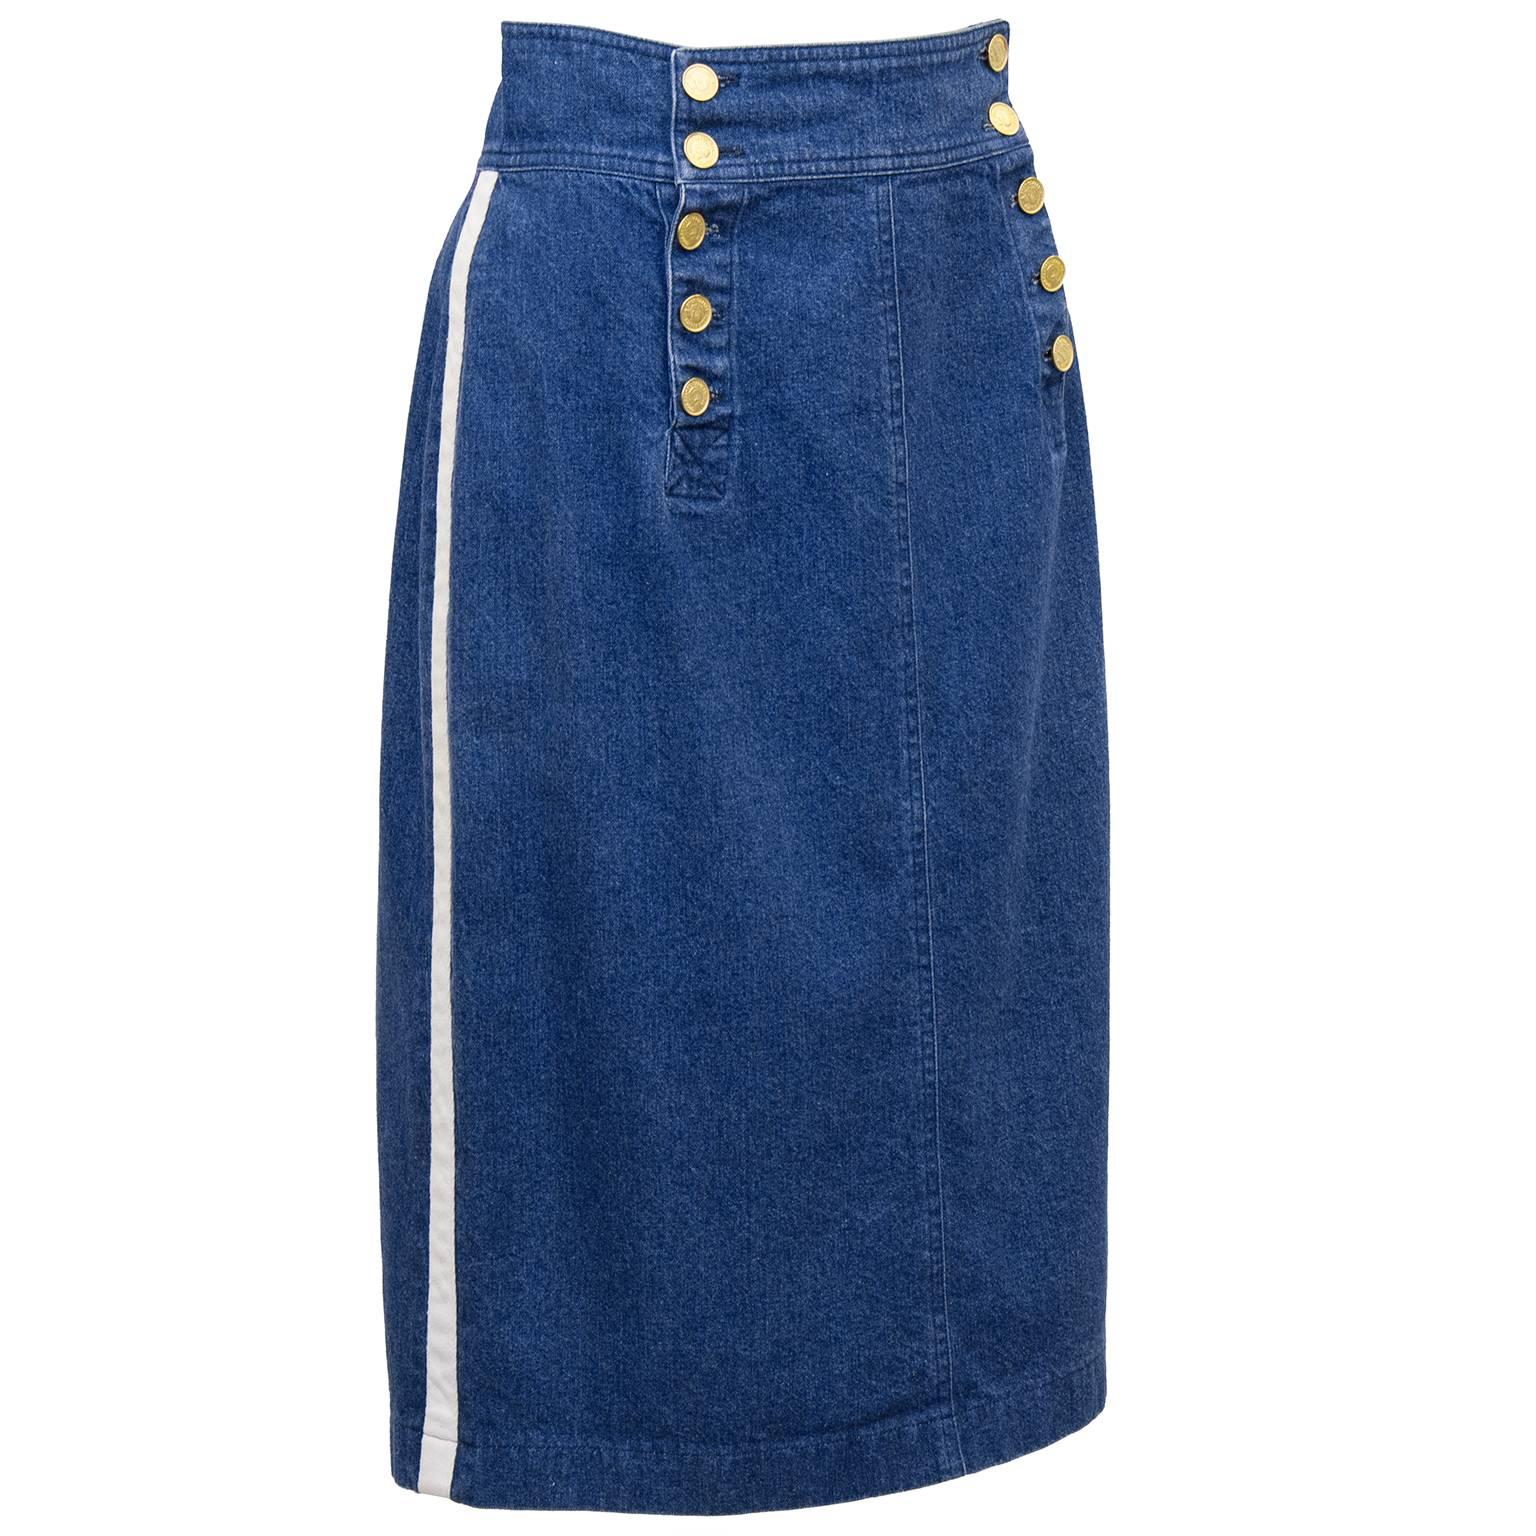 1990s Chanel high waisted sailor denim skirt. Excellent piece, featuring stunning gold buttons with a side portrait of Coco Chanel. White trim on side seams. Excellent vintage condition, fits like a US 4/6. 

Waist 31" Hips 38" Length